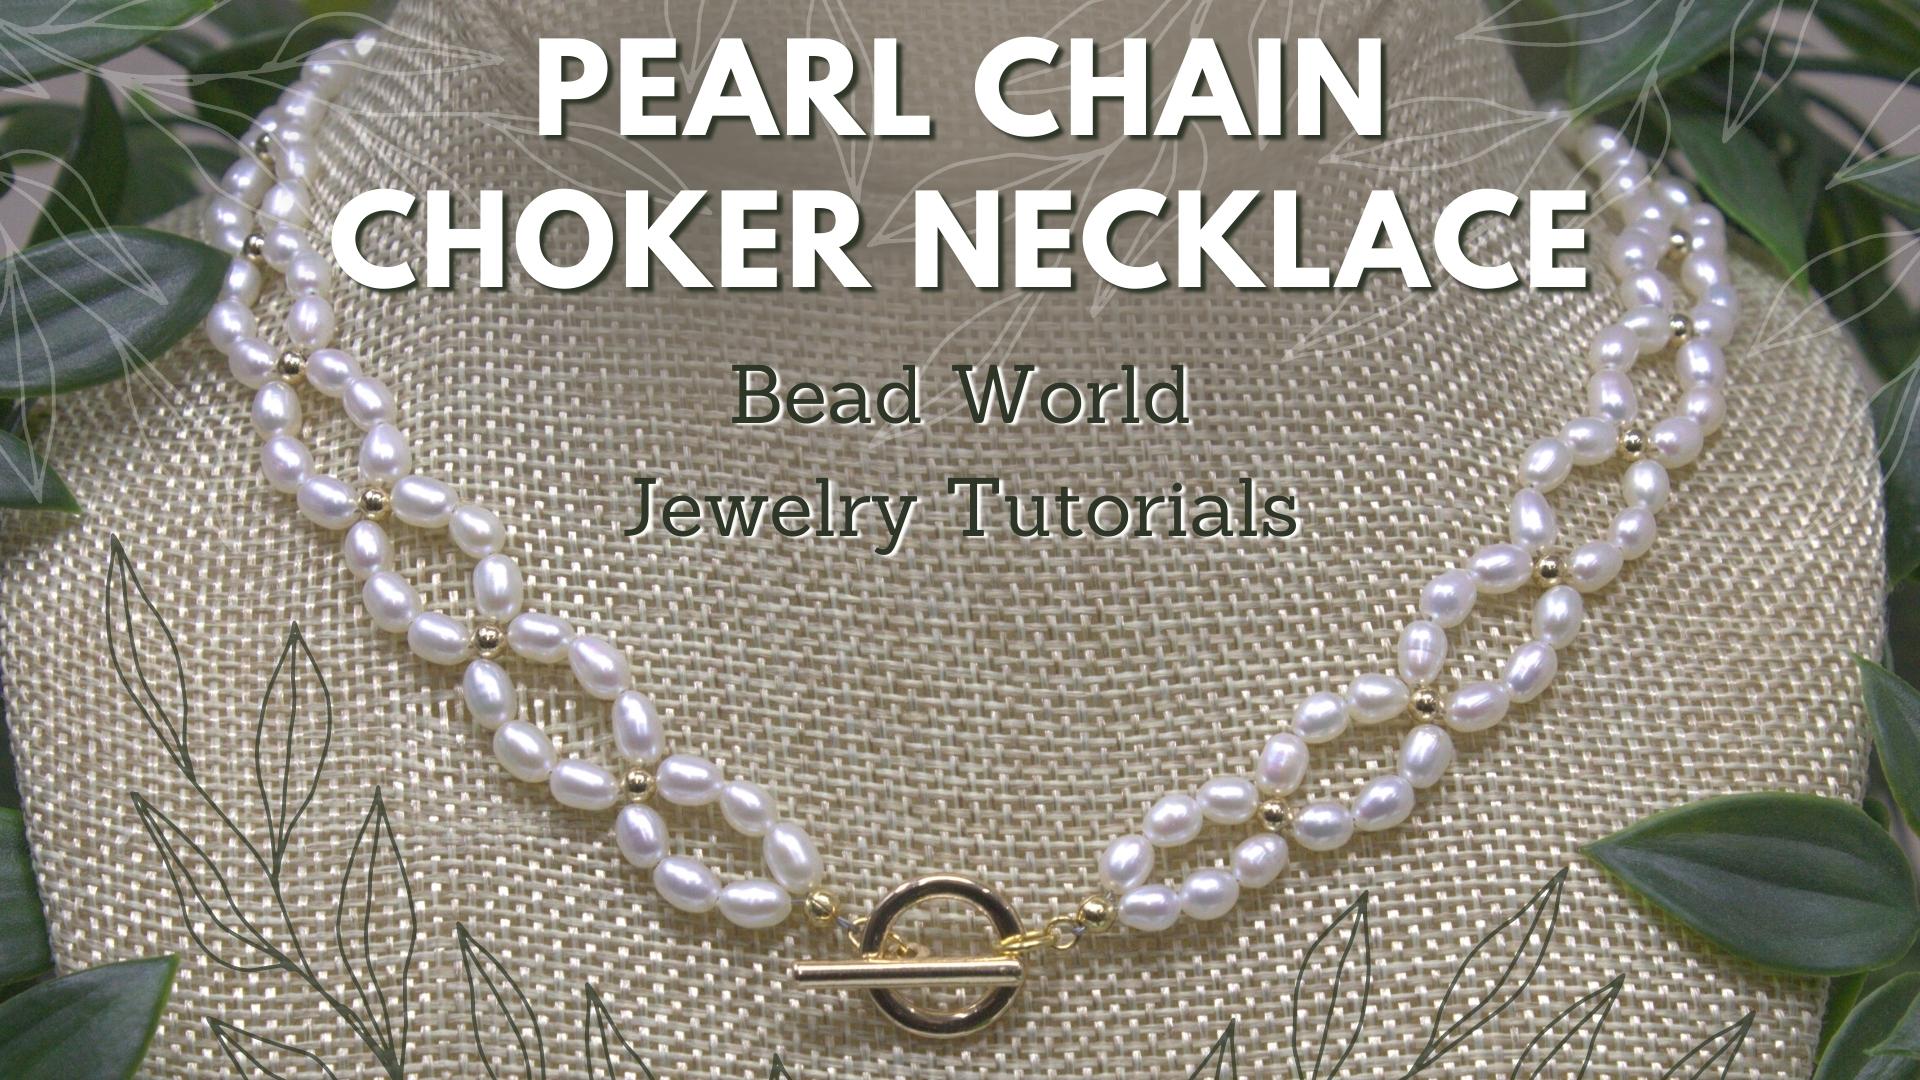 Pearl Chain Choker Necklace - Bead World